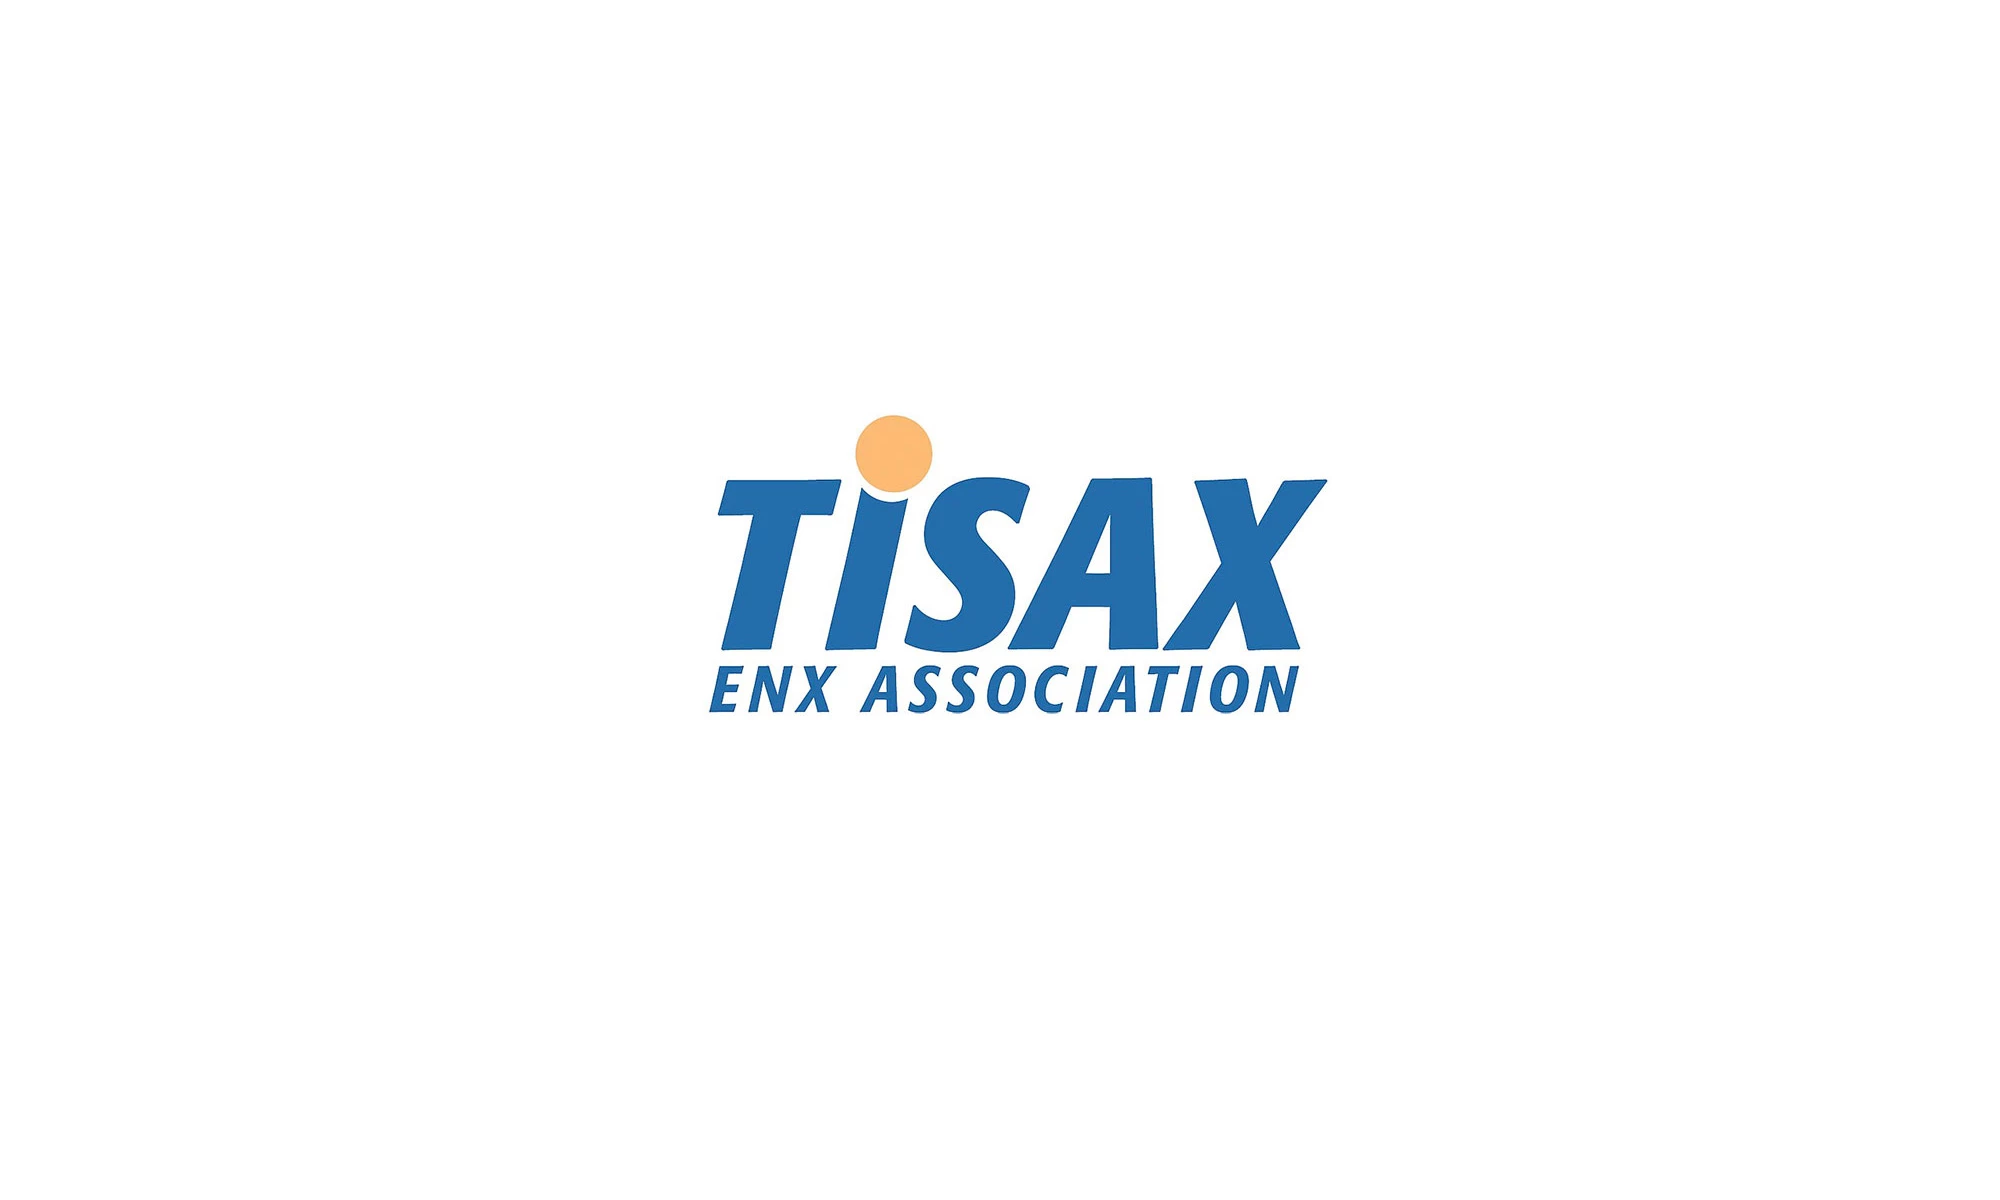 TISAX - certification successfully passed.